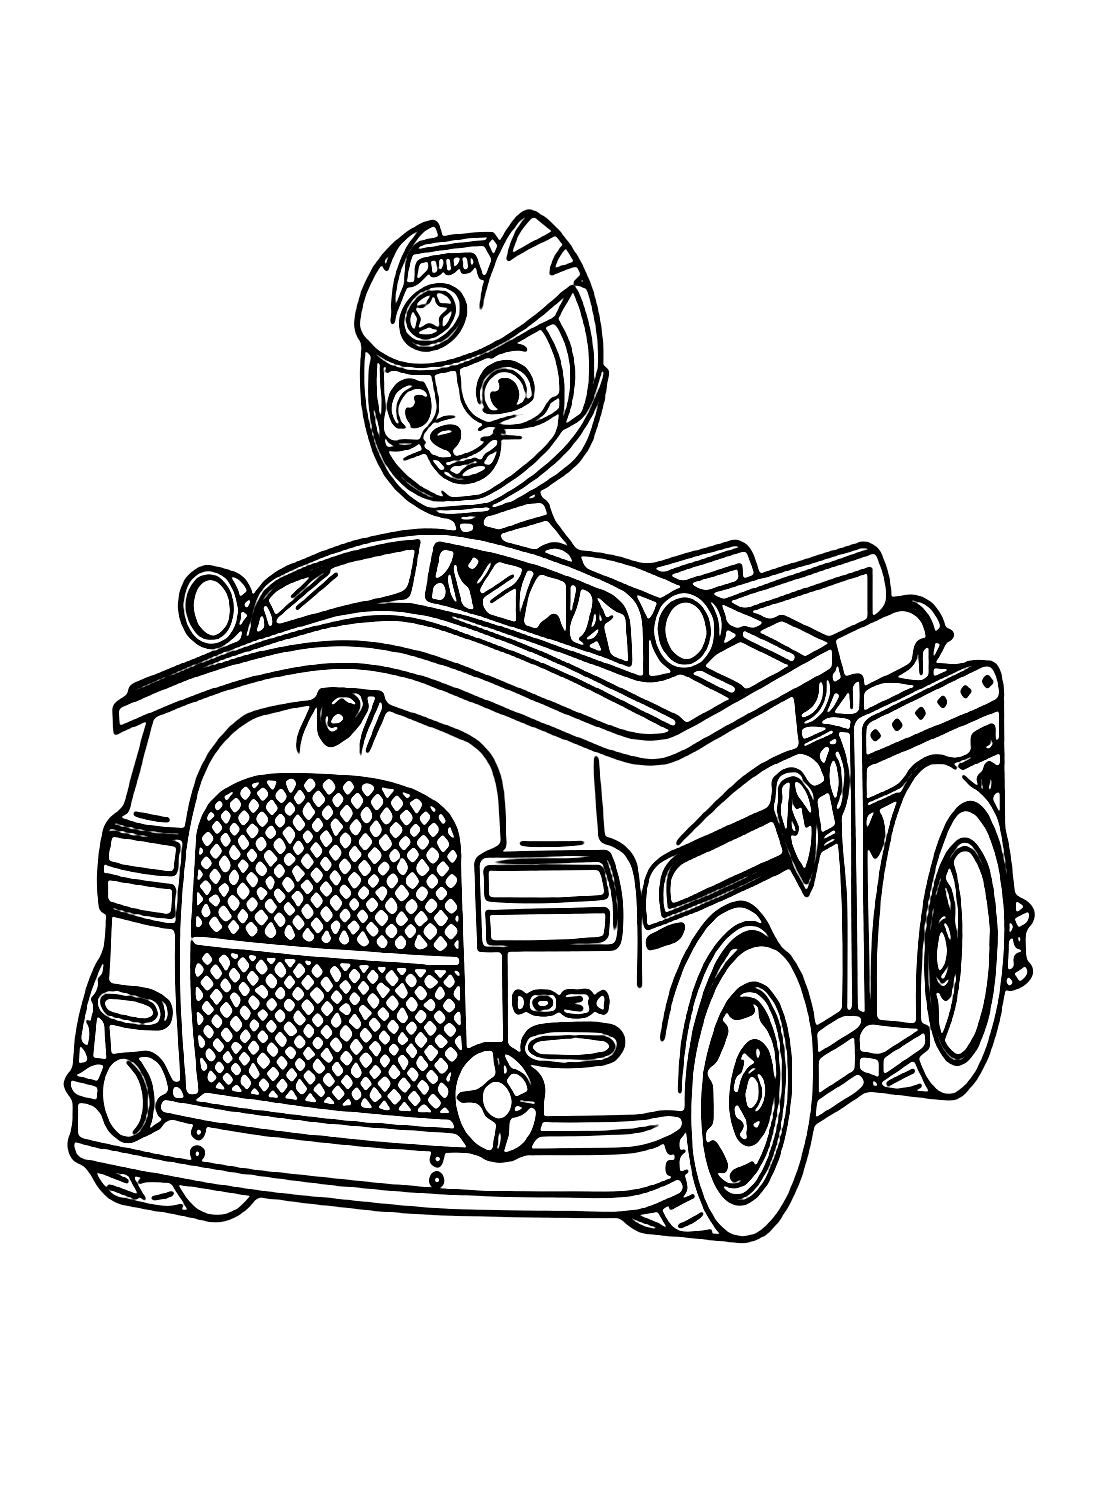 Wild cat paw patrol coloring pages printable for free download